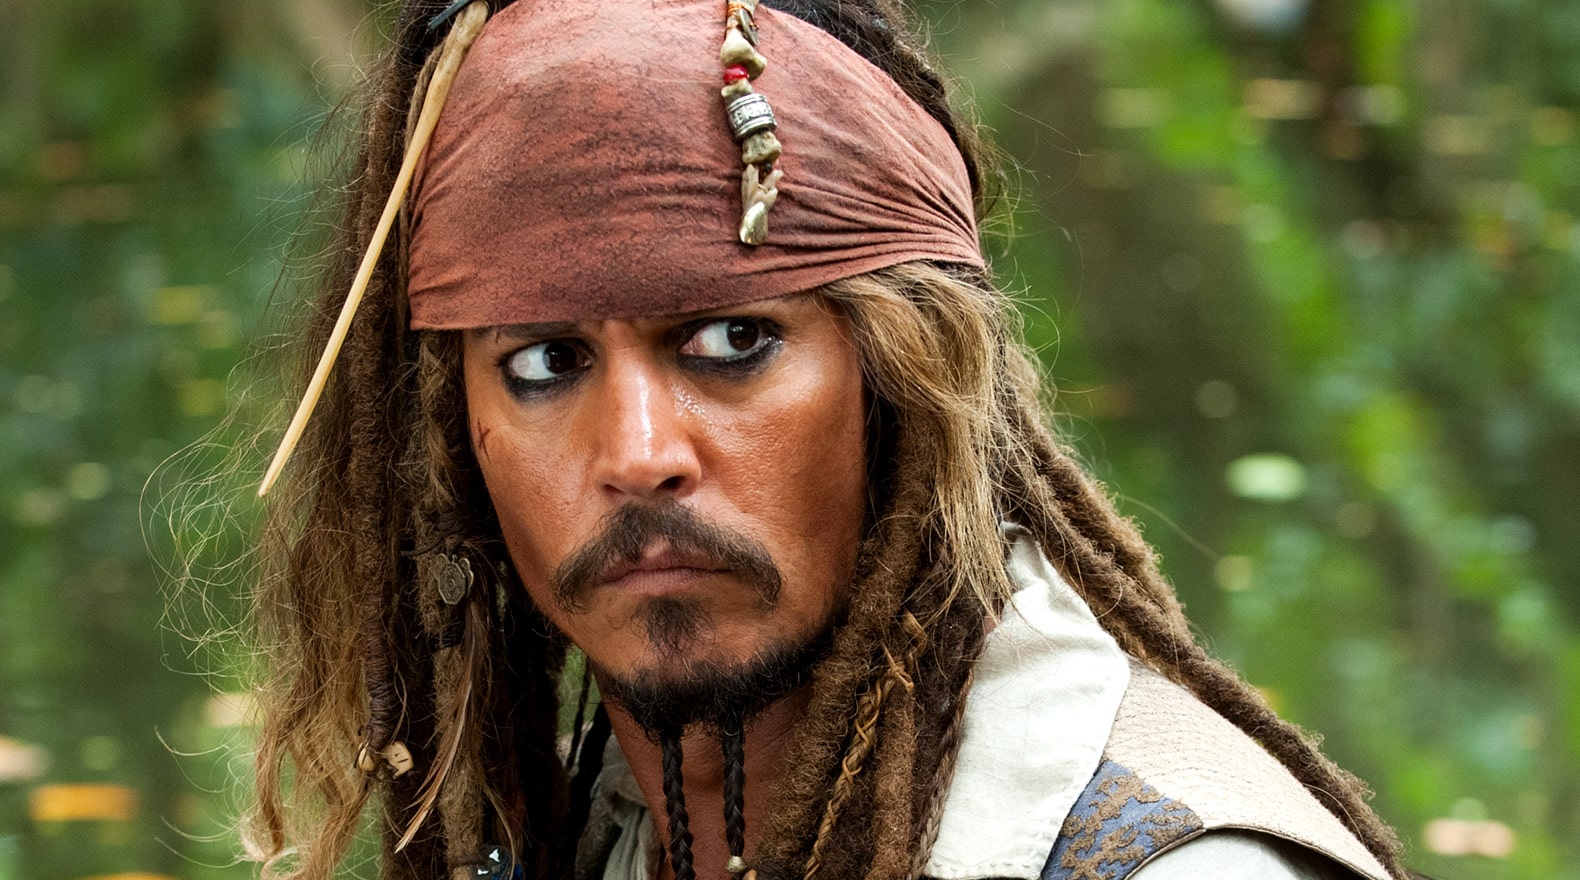 Johnny Depp's journey as Captain Jack Sparrow spanned from 2011 to 2017.